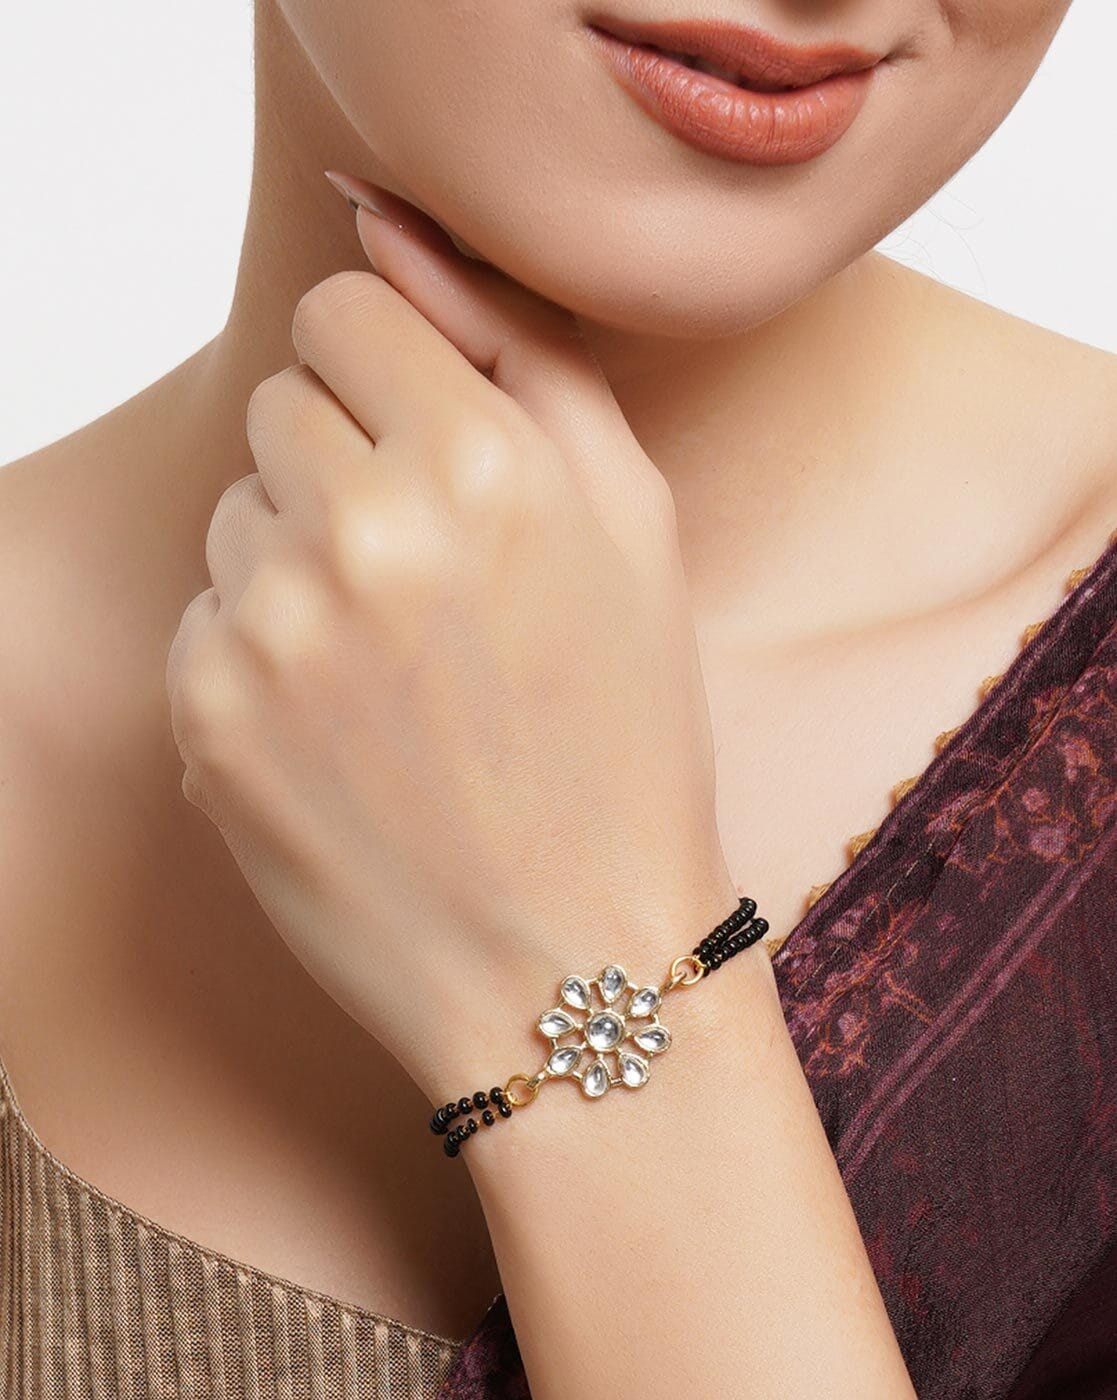 Forget Mangalsutra Necklaces Cos Mangalsutra Bracelets & Rings Are In! |  WeddingBazaar